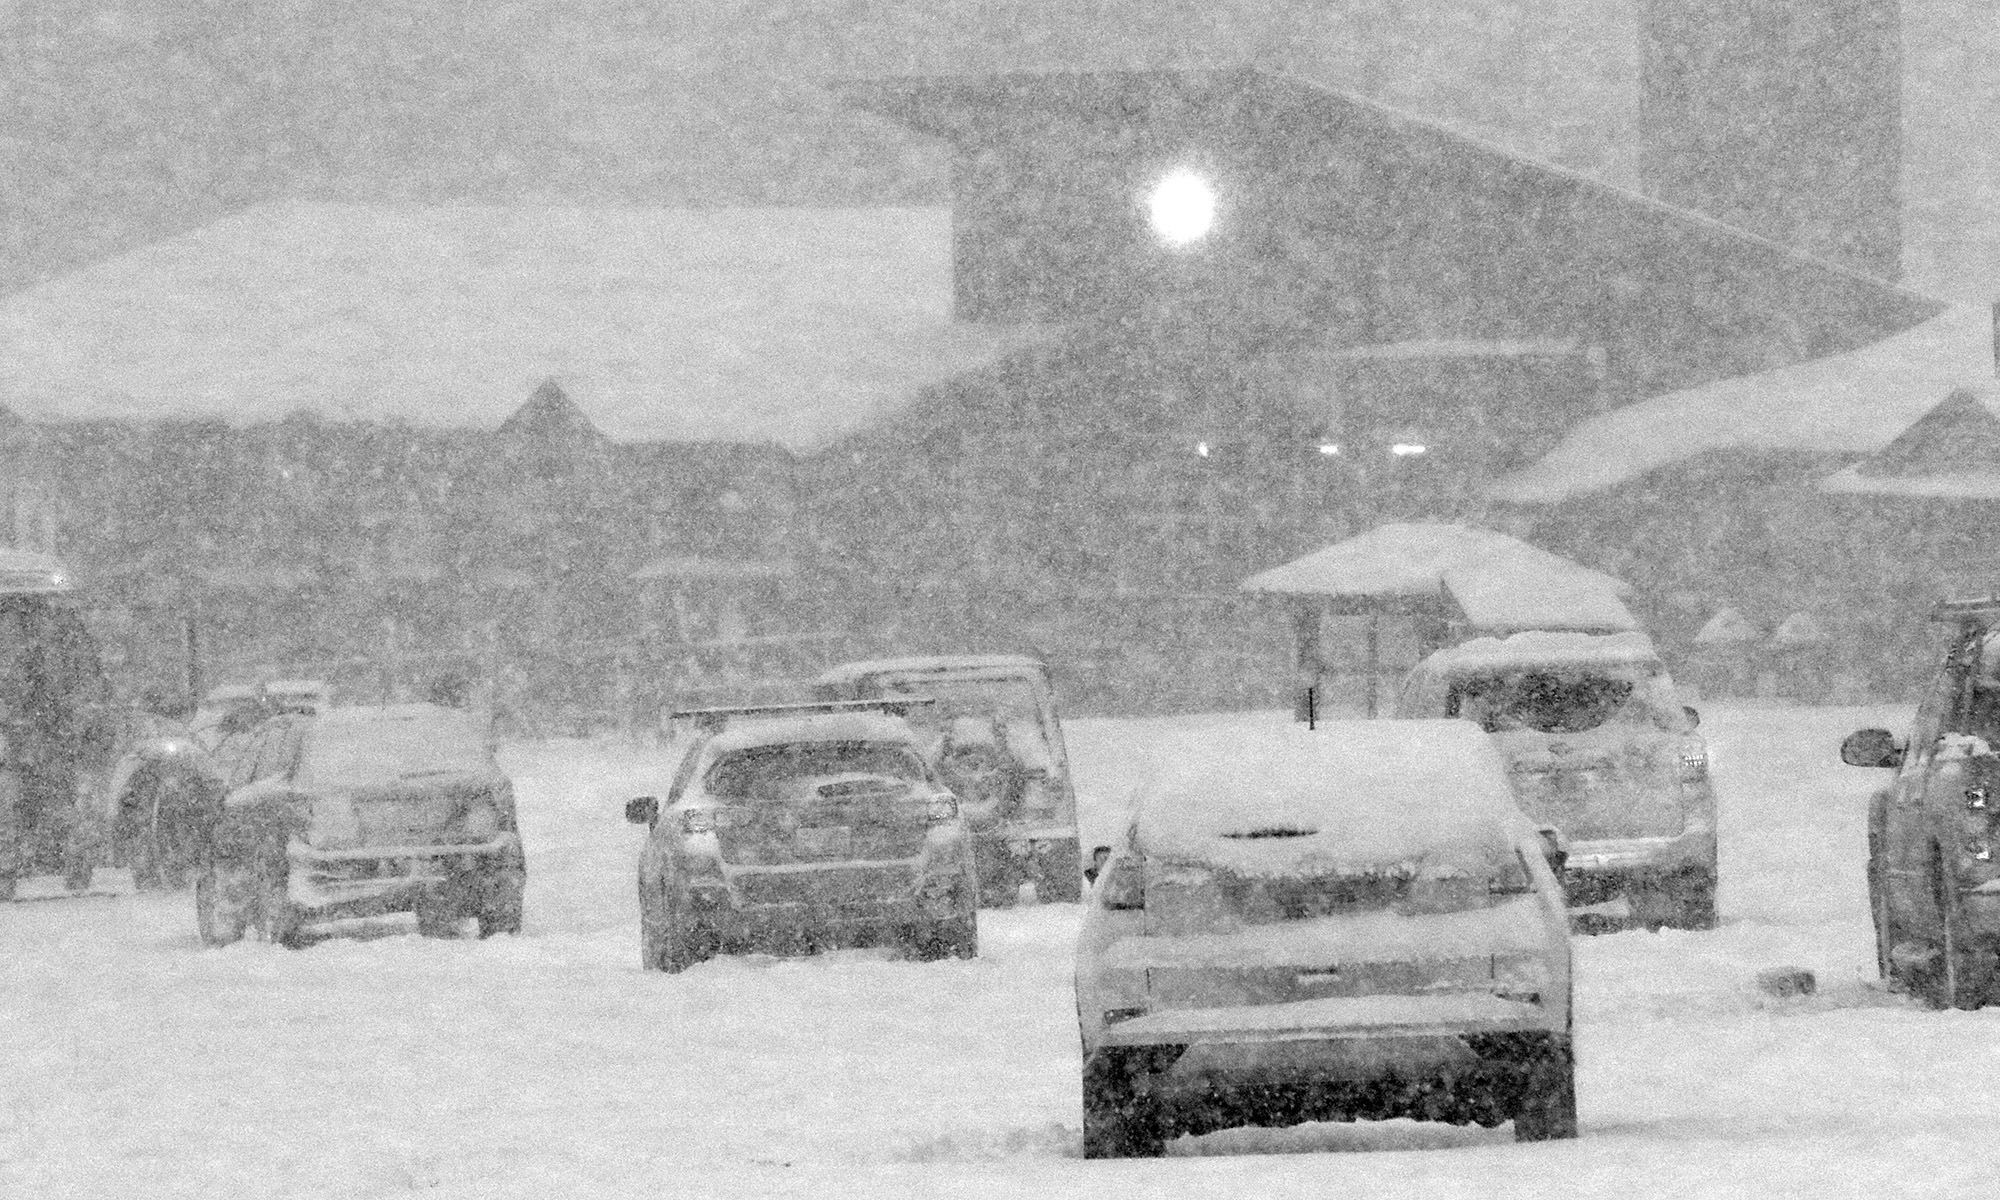 A black and white image of the Mt. Mansfield Base Lodge and cars in the parking lot during heavy snowfall at Stowe Mountain Ski Resort in Vermont